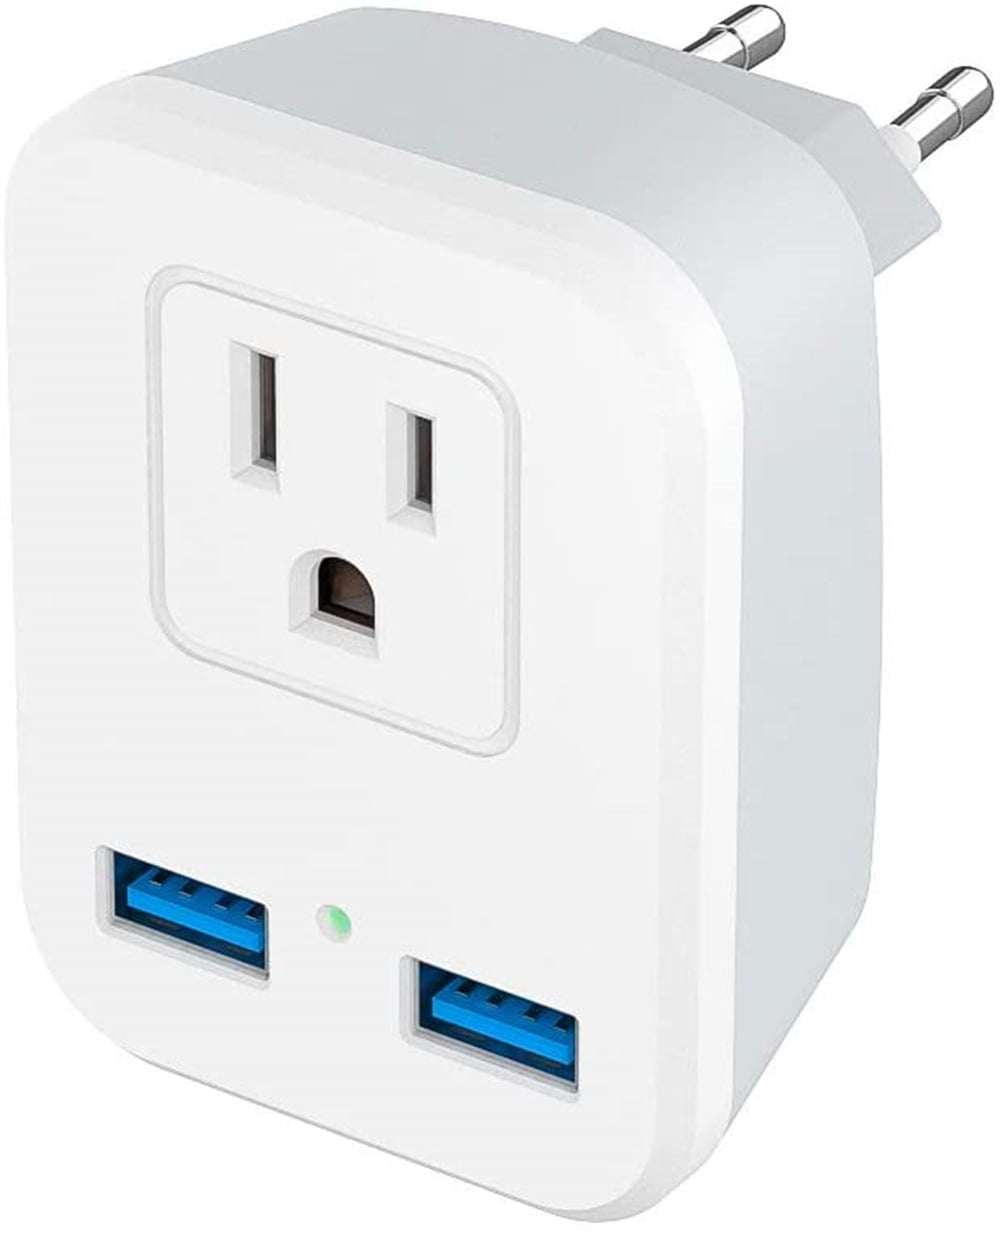 European International Travel Adapter EU Power Plug Converter Wall Charger with AC Outlet Dual USB, US to Most Europe France Germany Iceland Spain (Type C) - Walmart.com